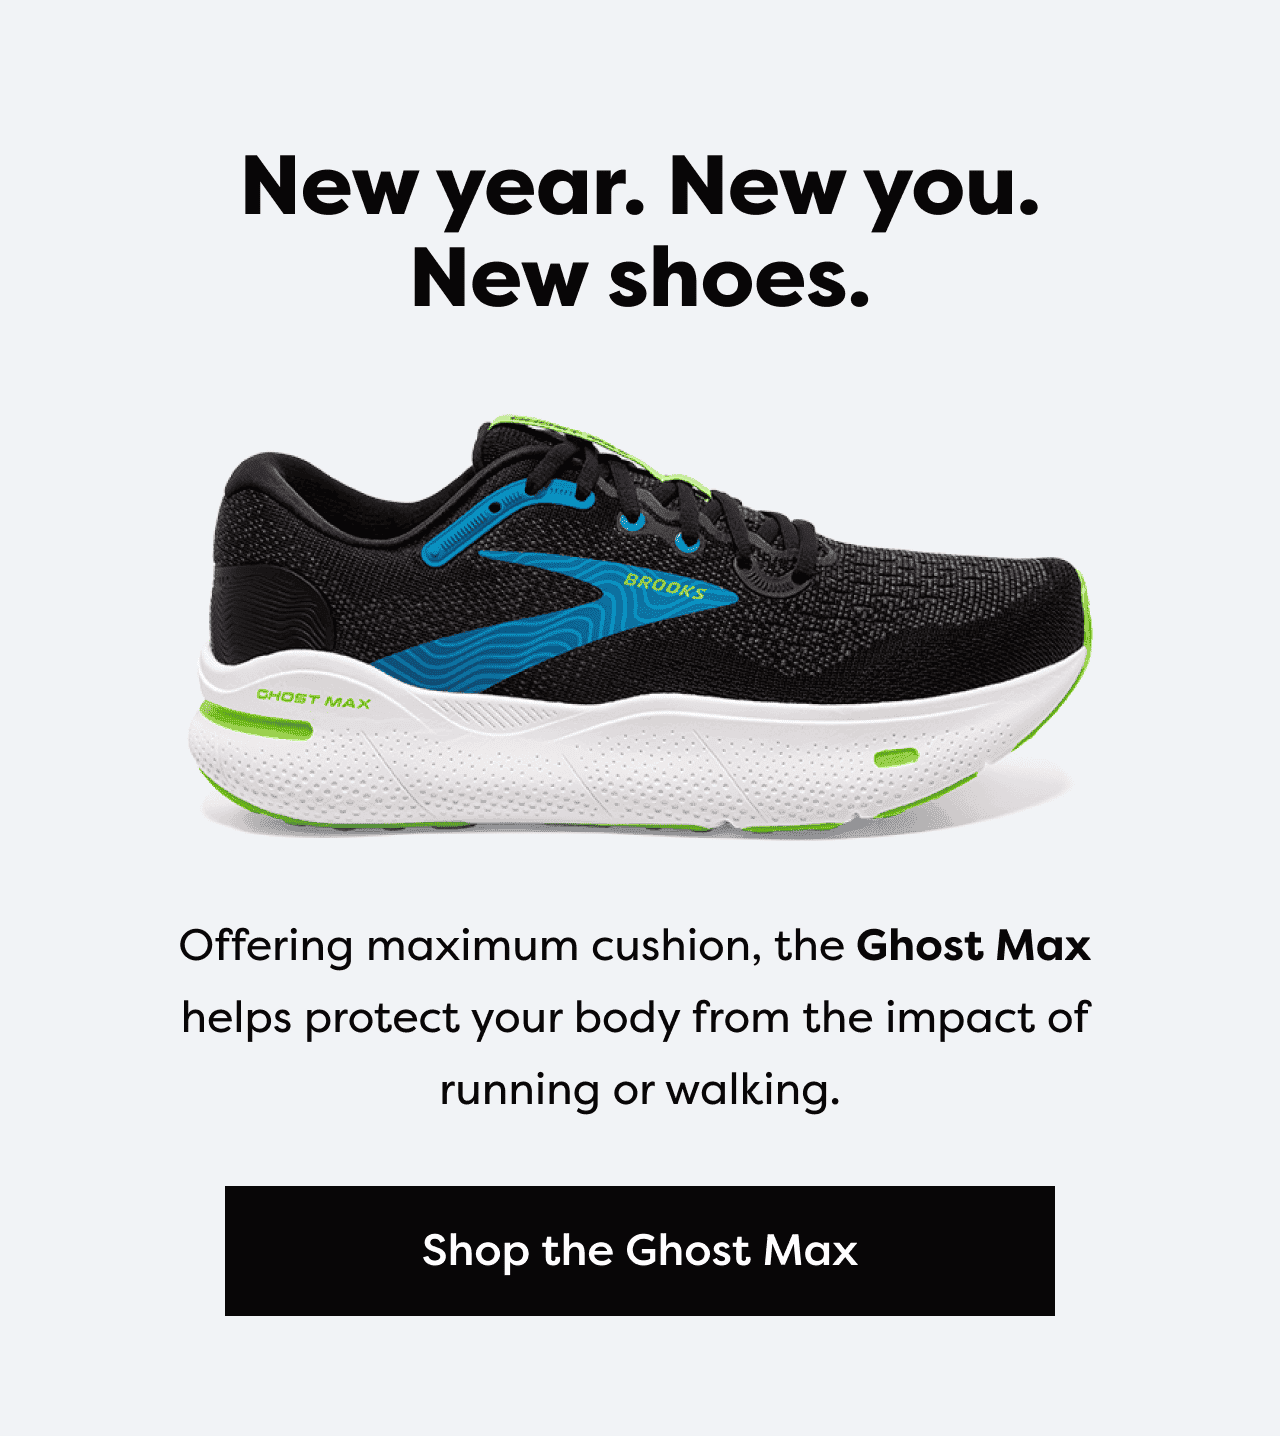 New year. New you. New shoes. Offering maximum cushion, the Ghost Max helps protect your body from the impact of running or walking. | Shop the Ghost Max